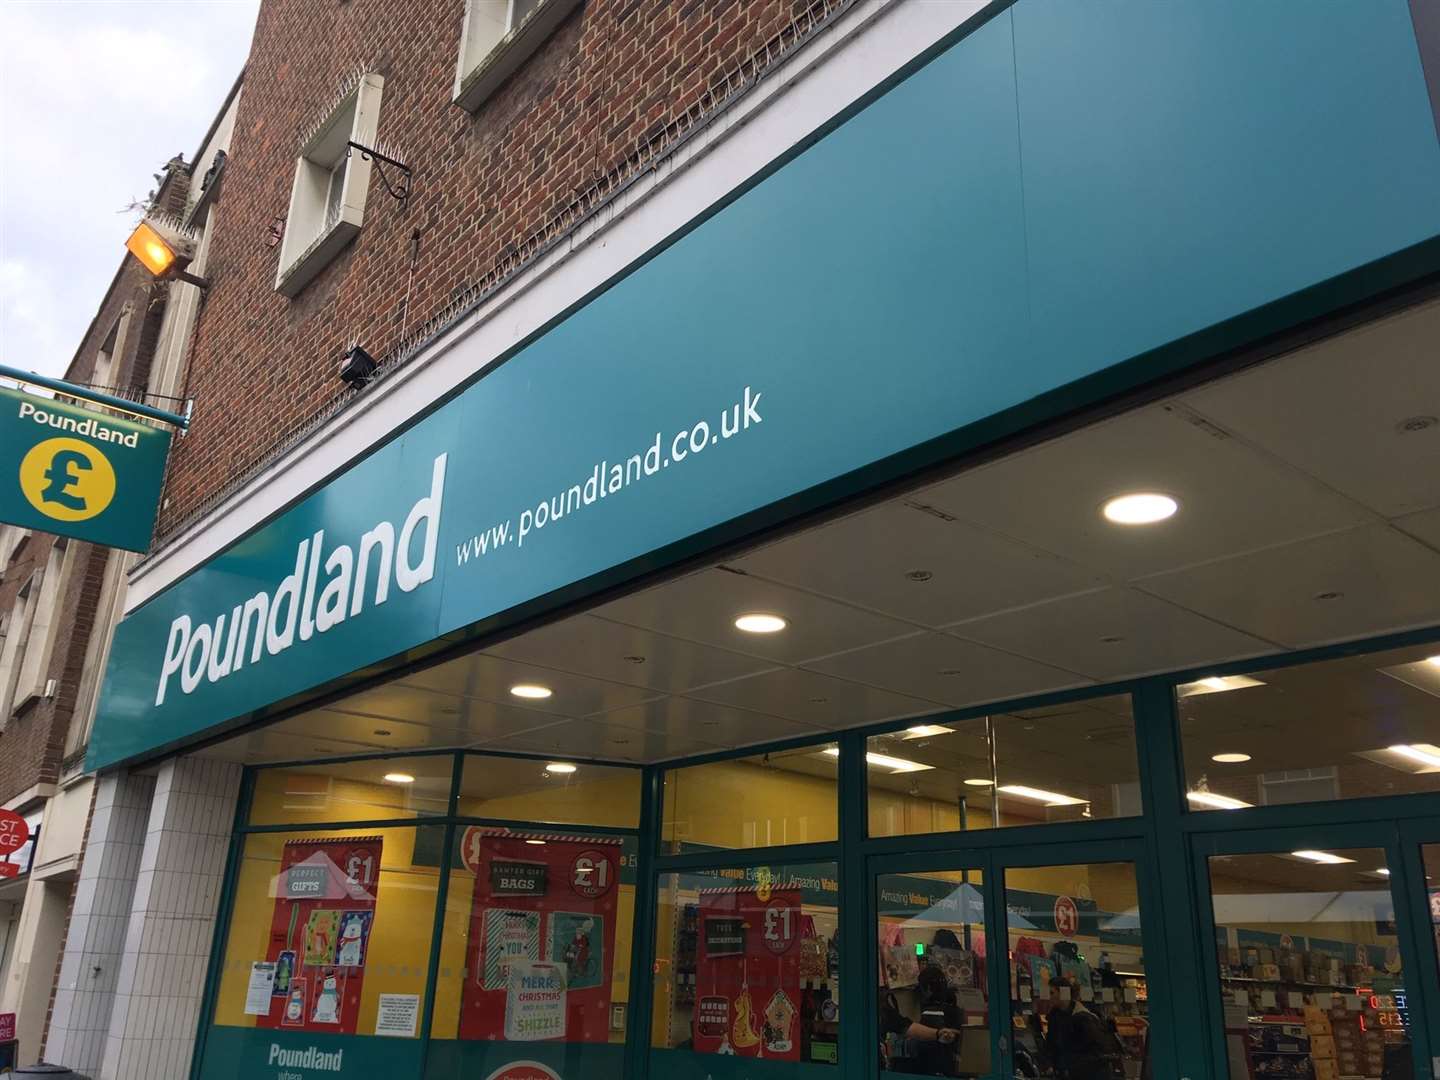 The city will have two Poundland stores